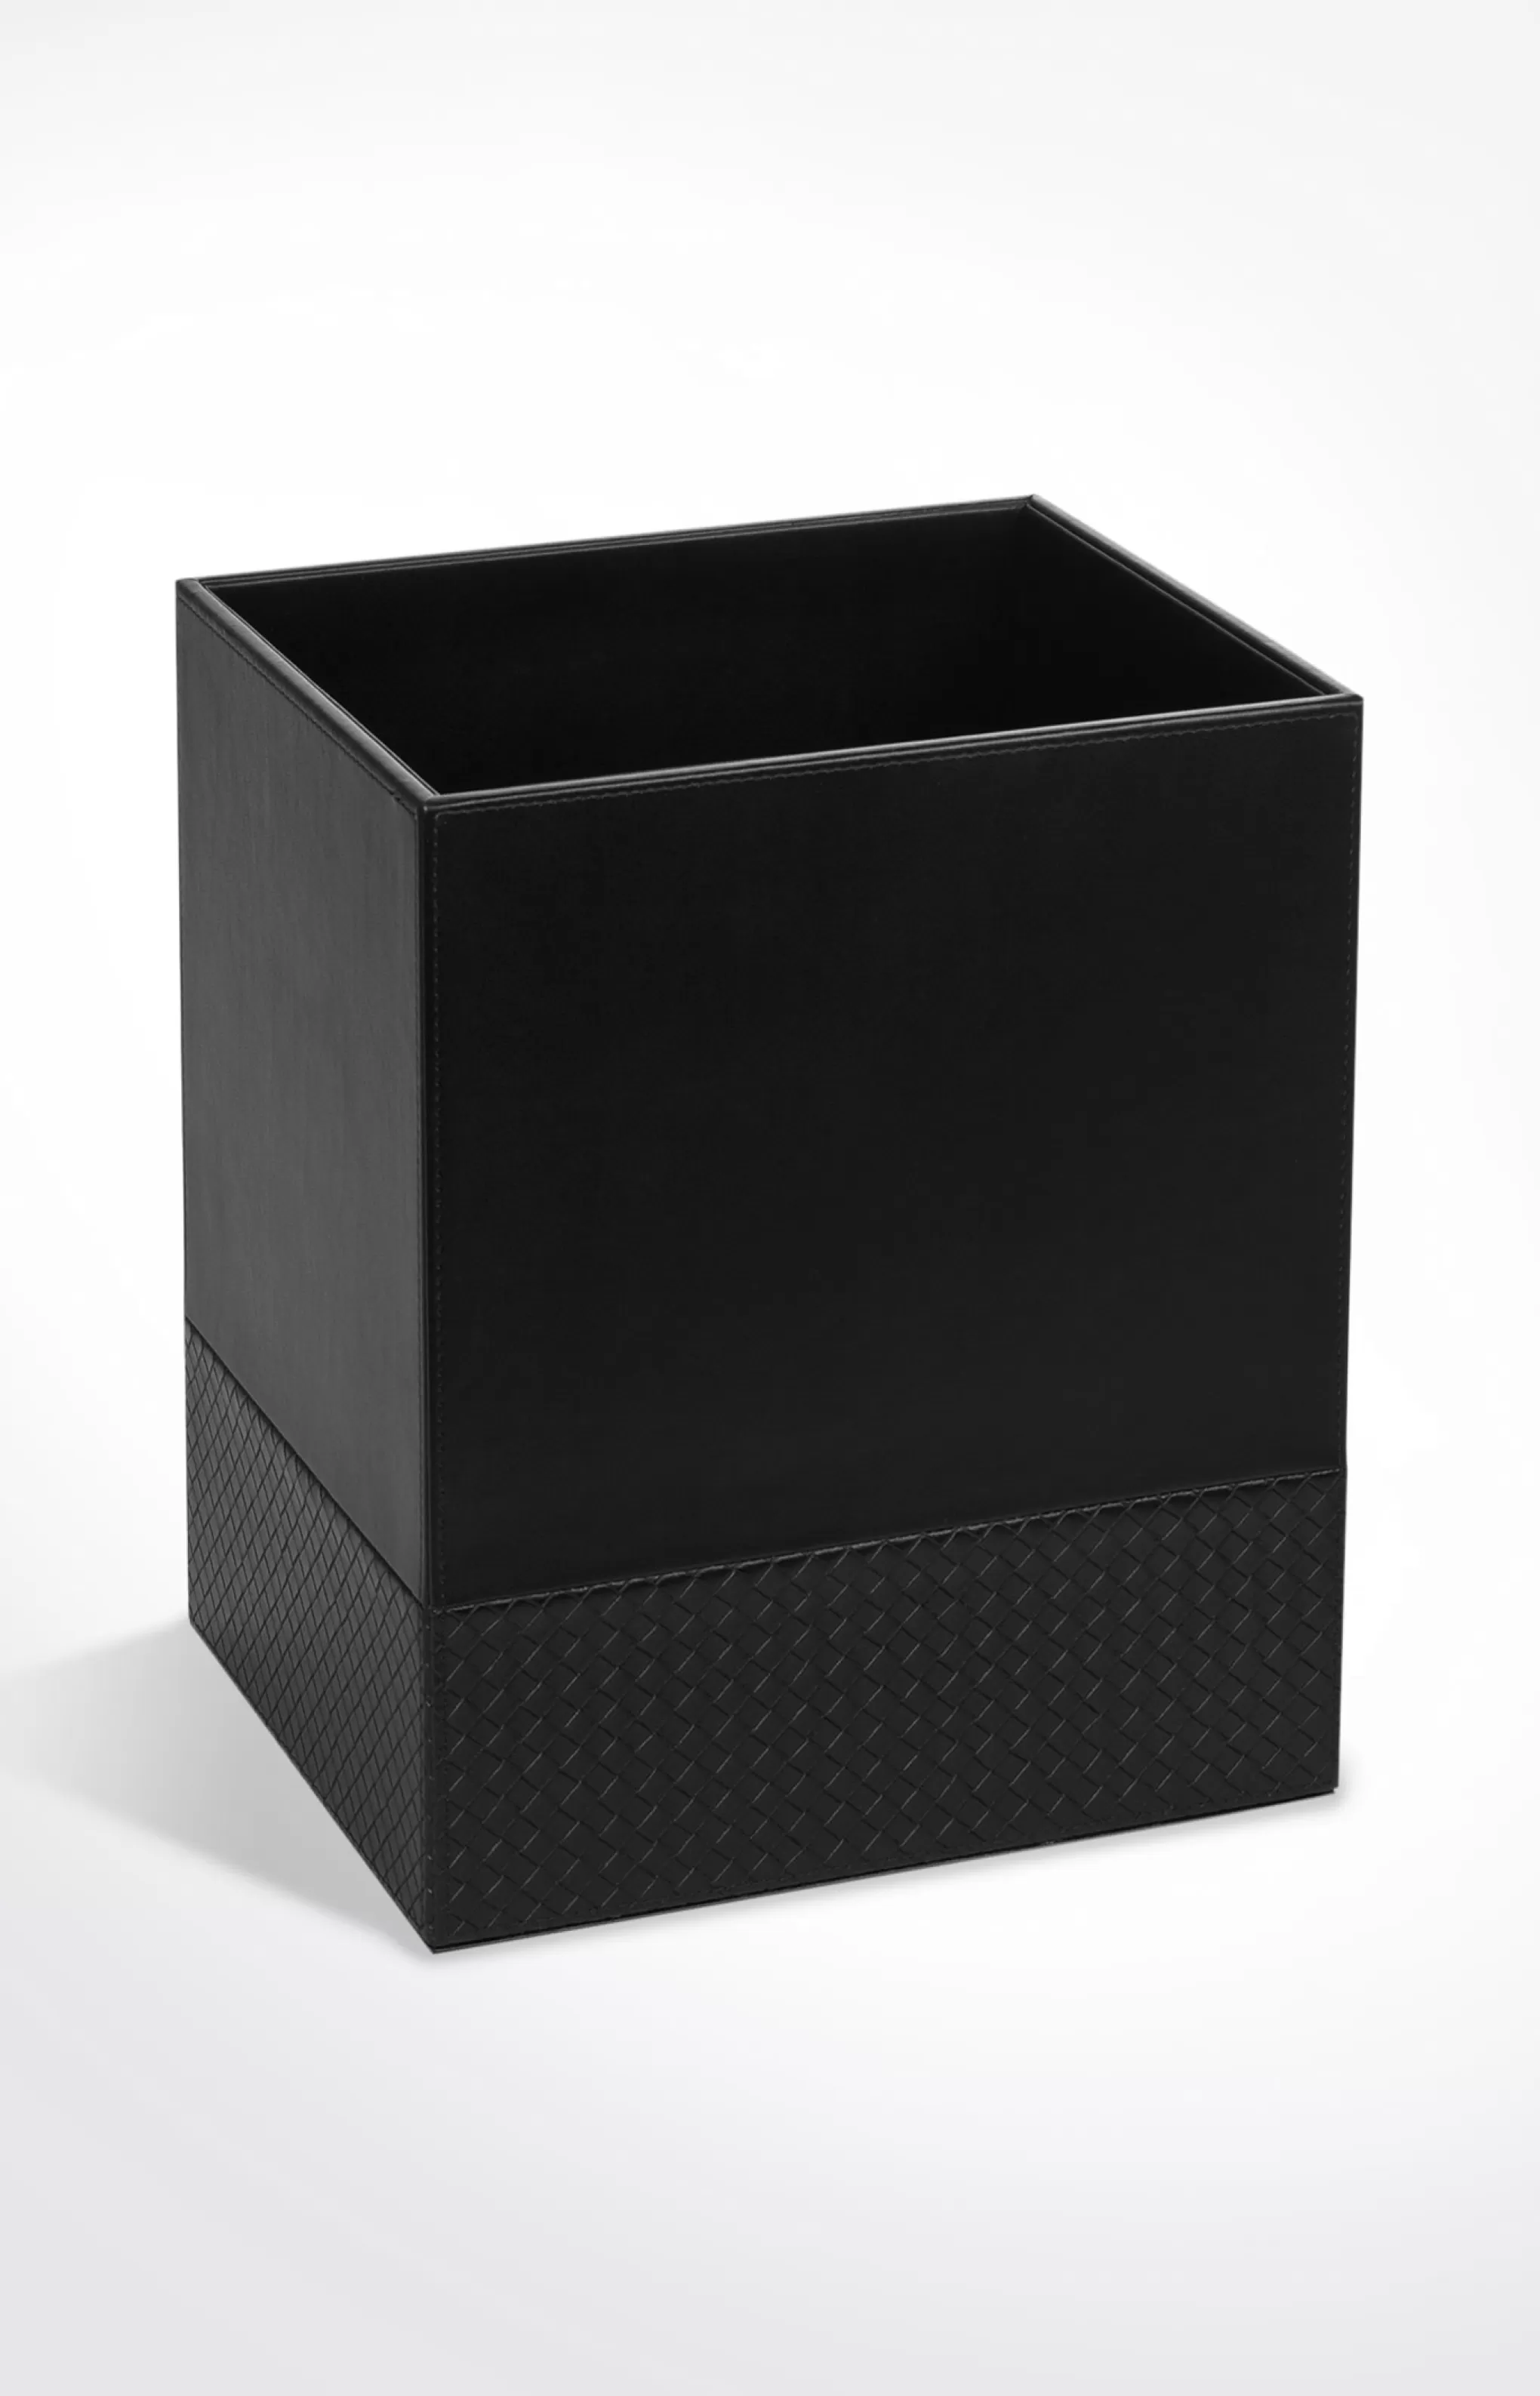 Bathroom Accessories | Discover Everything | Home Accessories*JOOP Bathroom Accessories | Discover Everything | Home Accessories Bathline waste basket, black